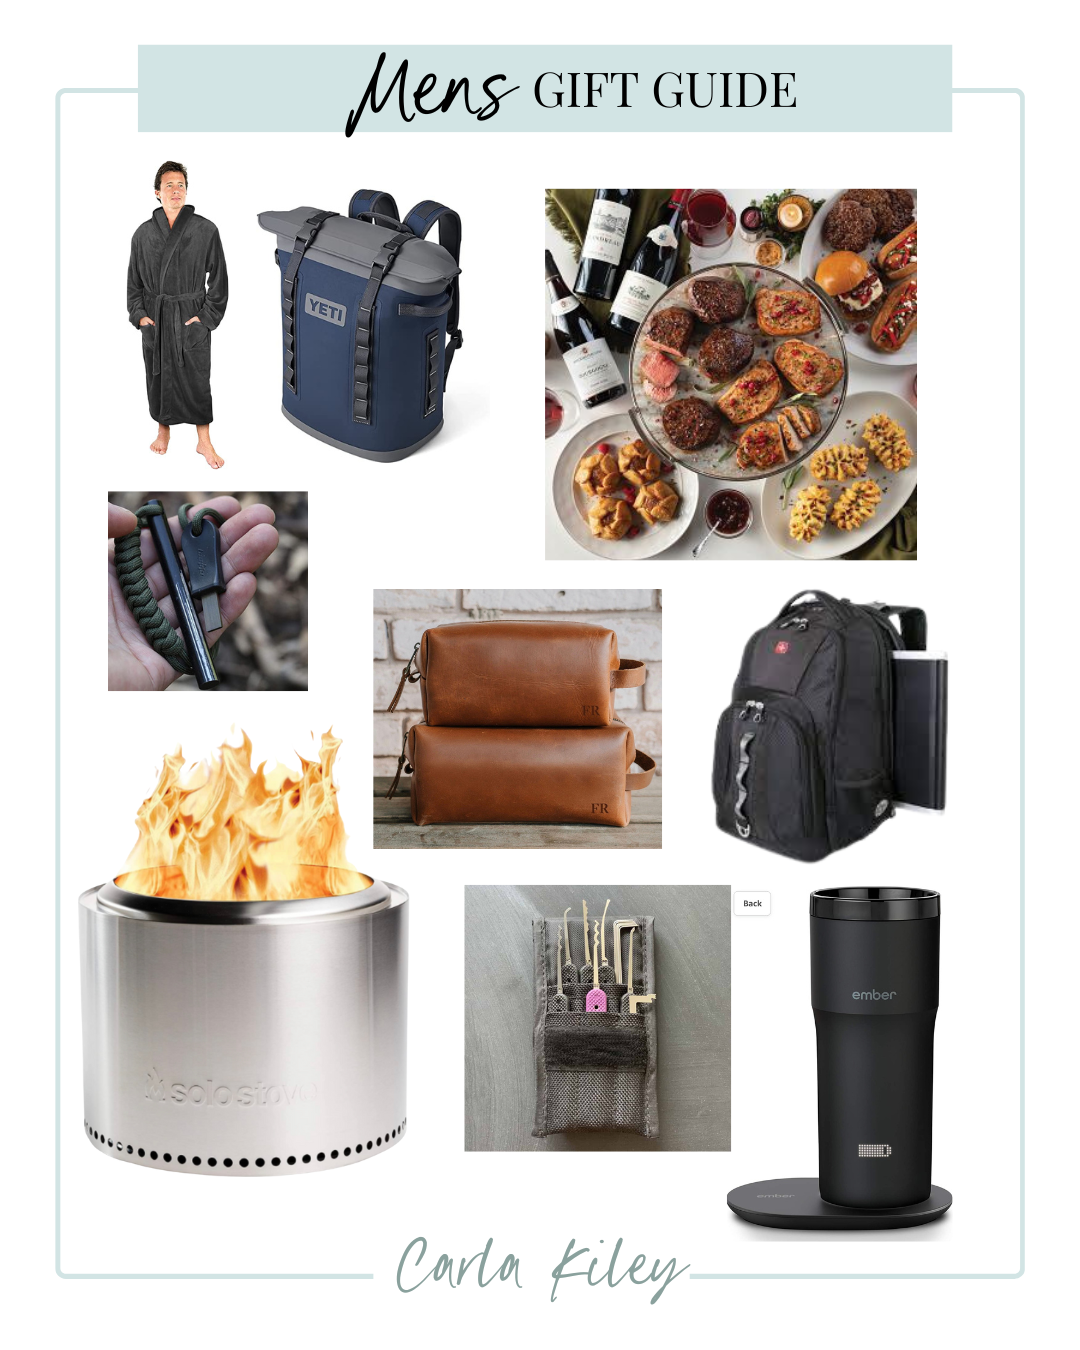 https://www.carlakiley.com/wp-content/uploads/2022/11/Mens-Gift-Guide.png